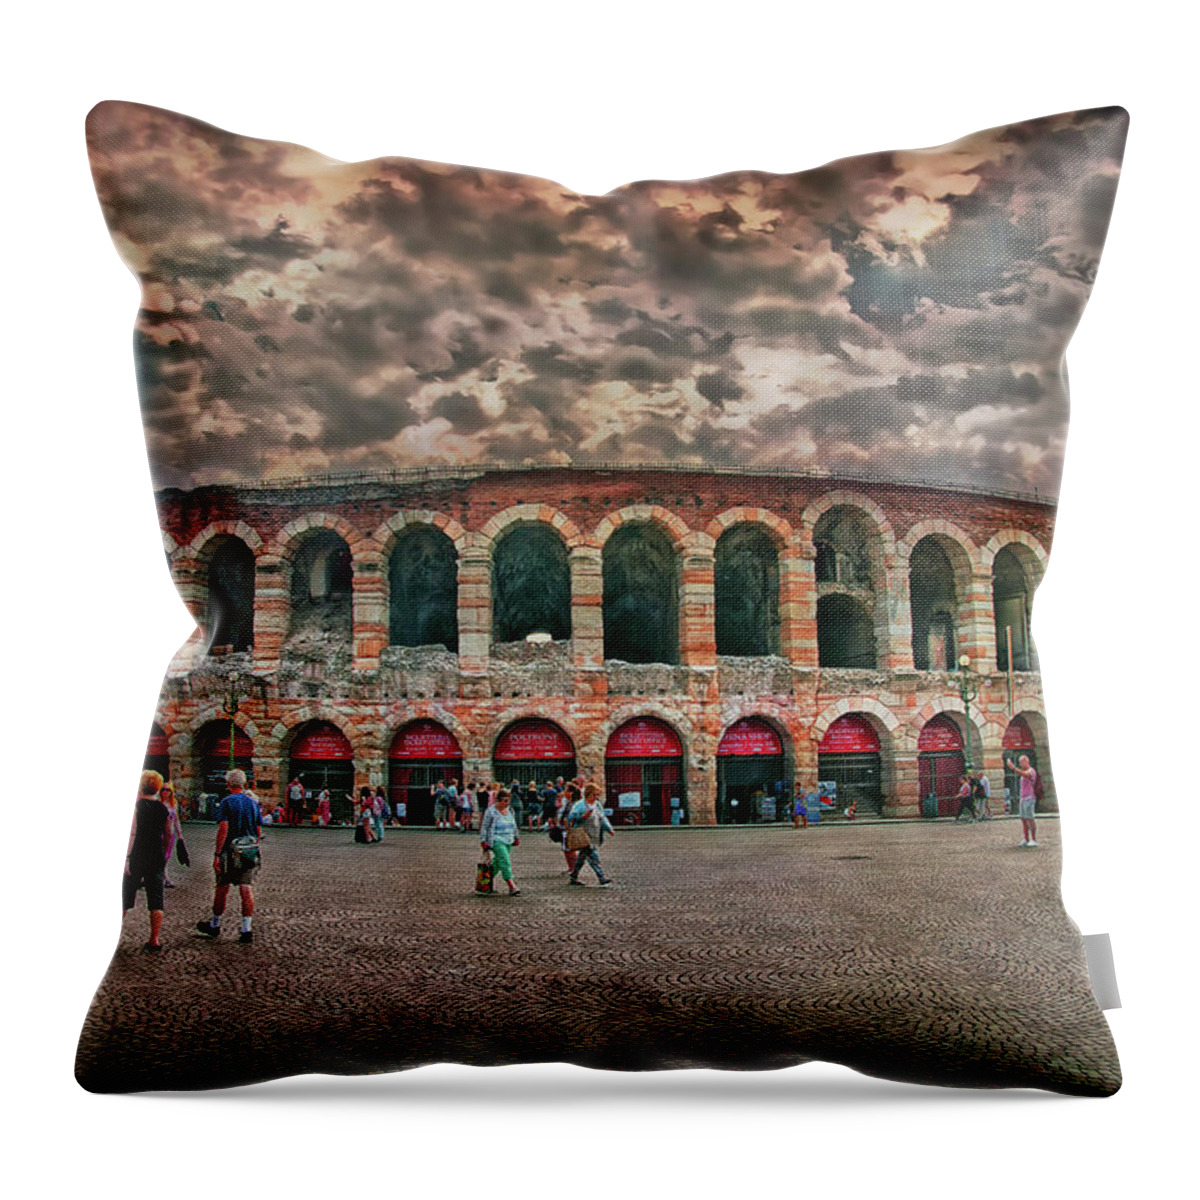 Verona Throw Pillow featuring the photograph The Arena by Hanny Heim